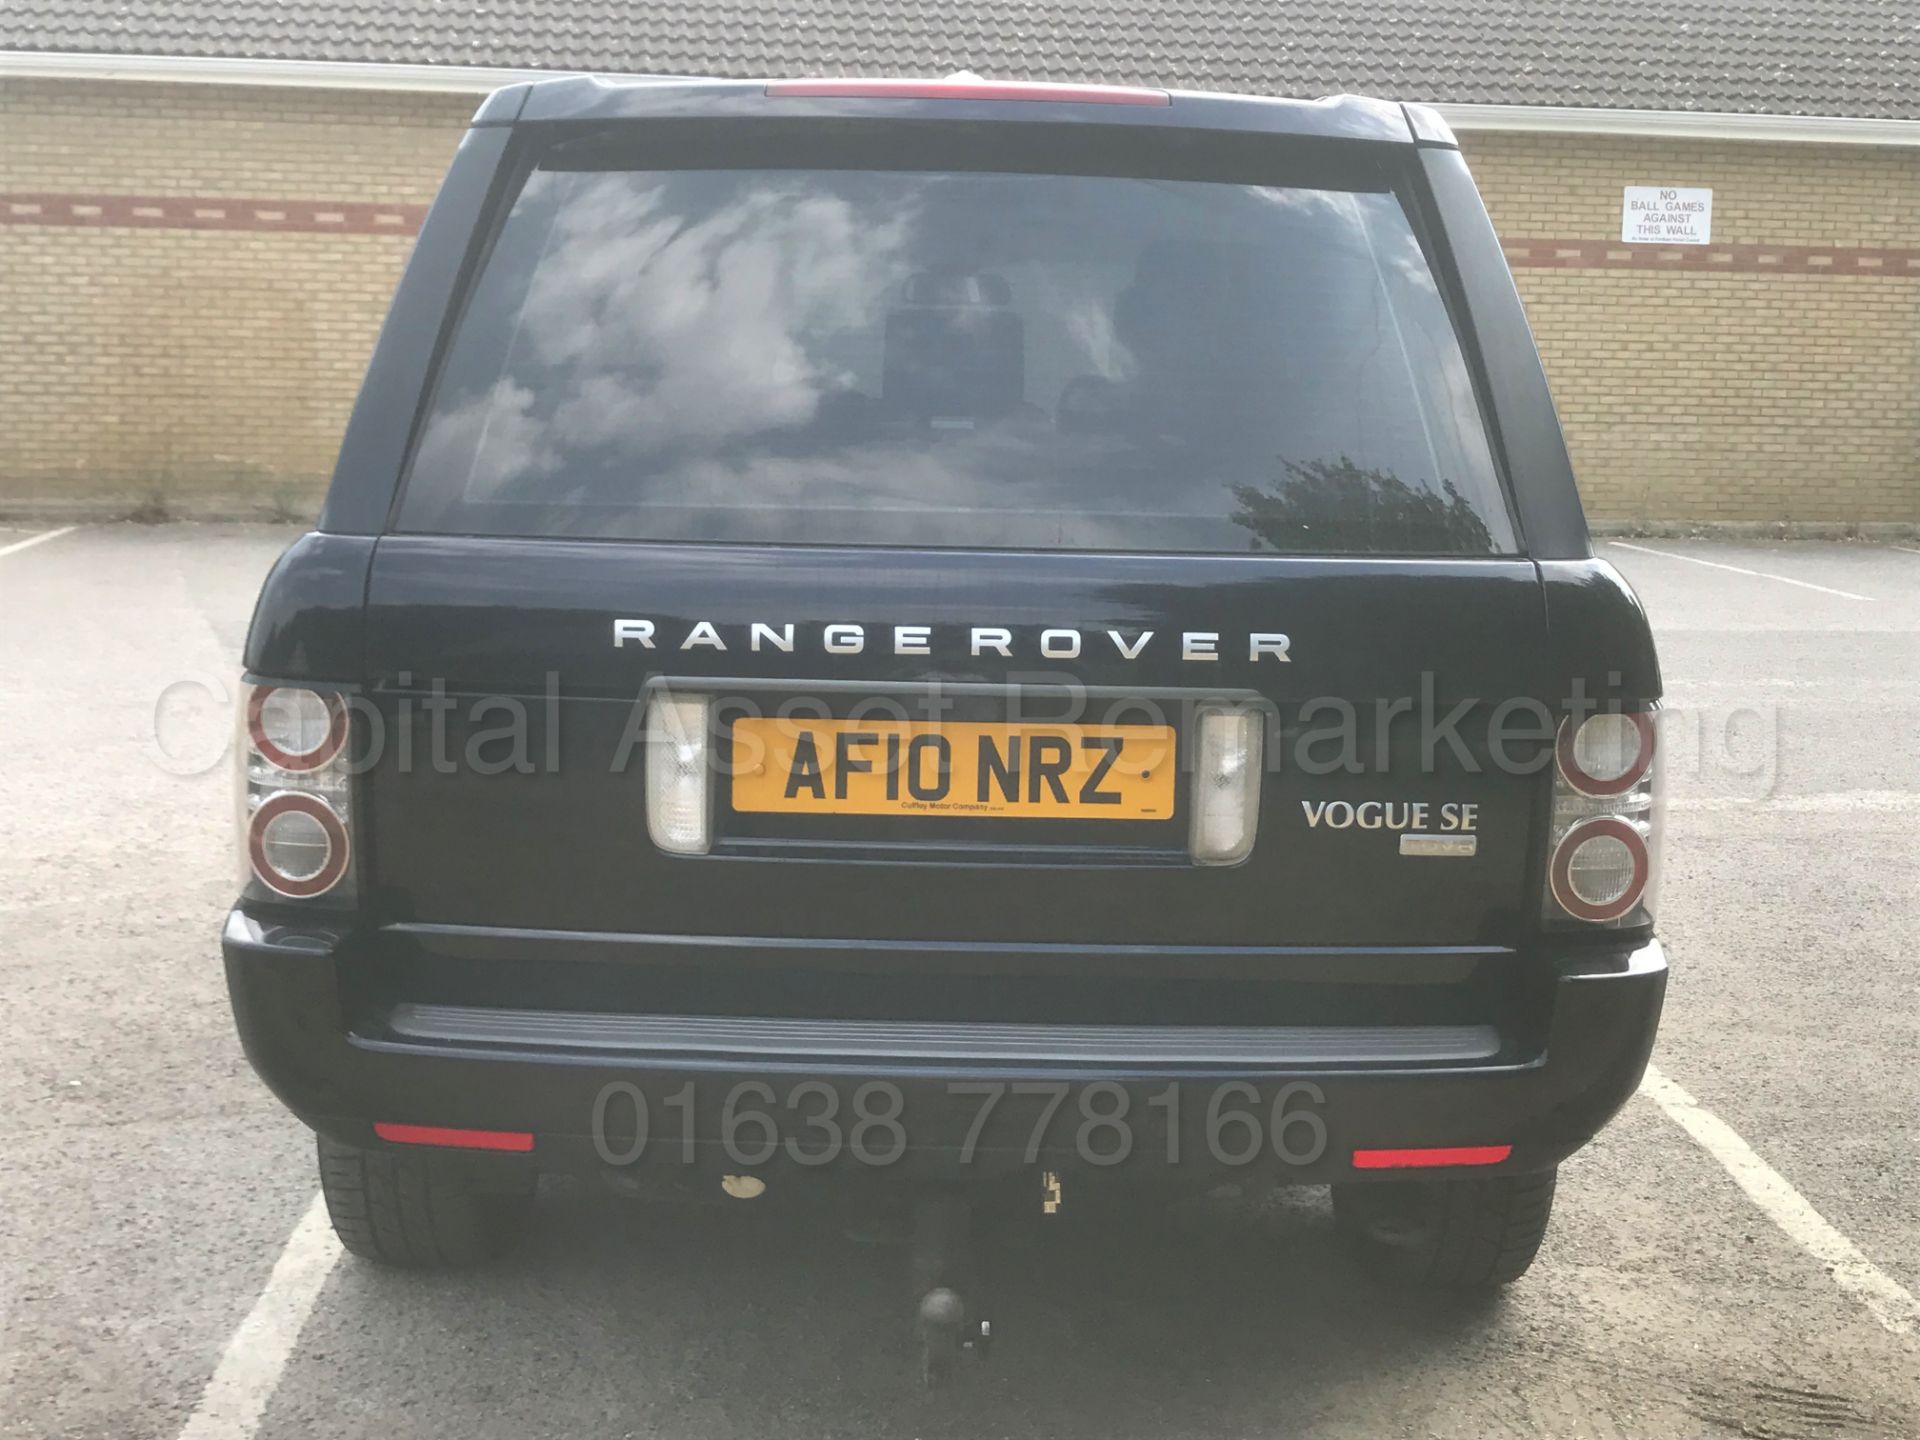 (On Sale) RANGE ROVER VOGUE **SE EDITION** (2010 - FACELIFT EDITION) 'TDV8 - 268 BHP - AUTO' **WOW** - Image 10 of 62